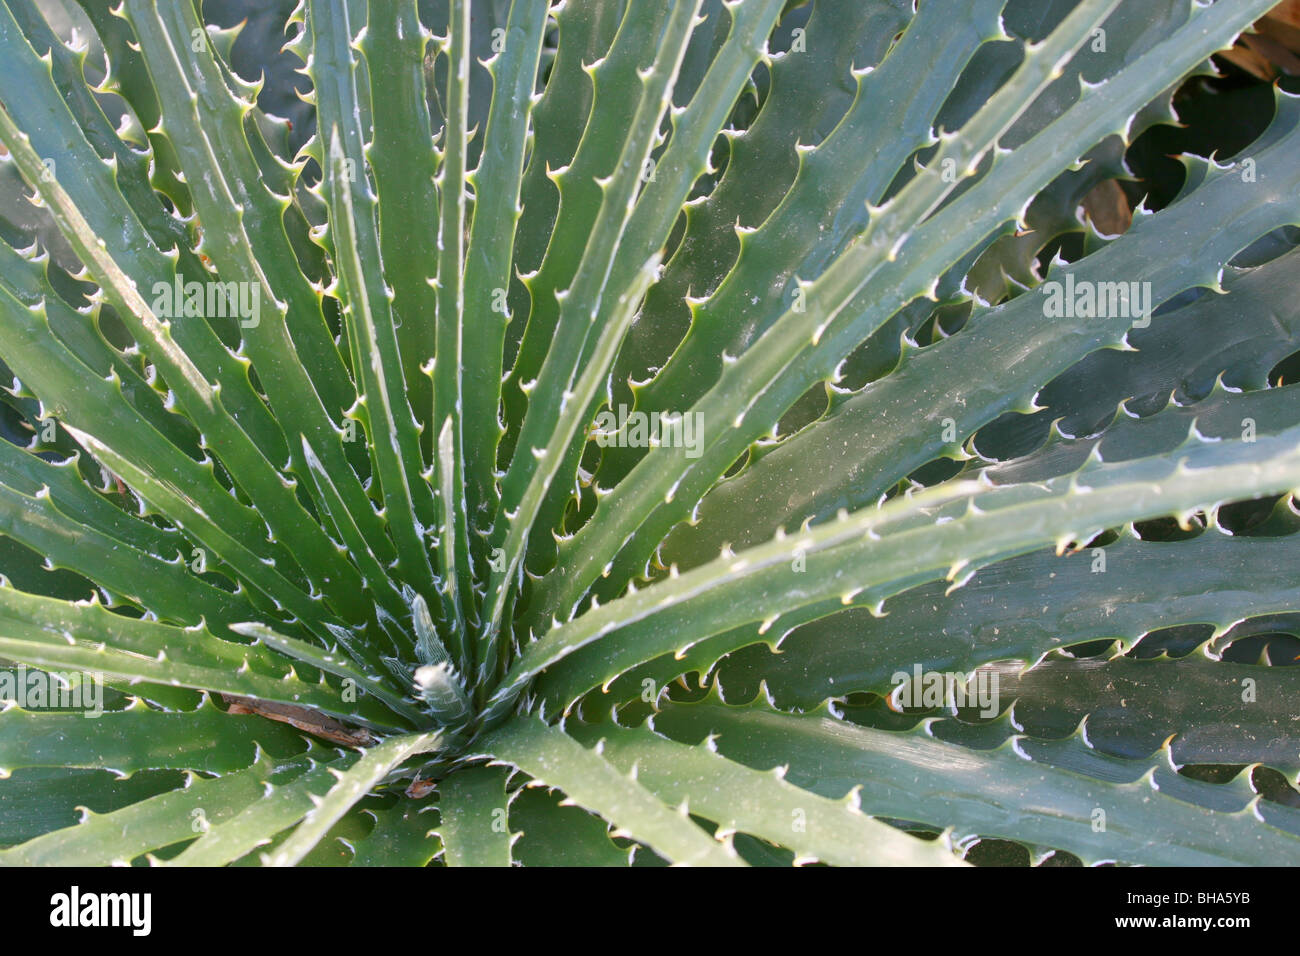 Sharp and spiny leaves of an Aloe plant. Stock Photo